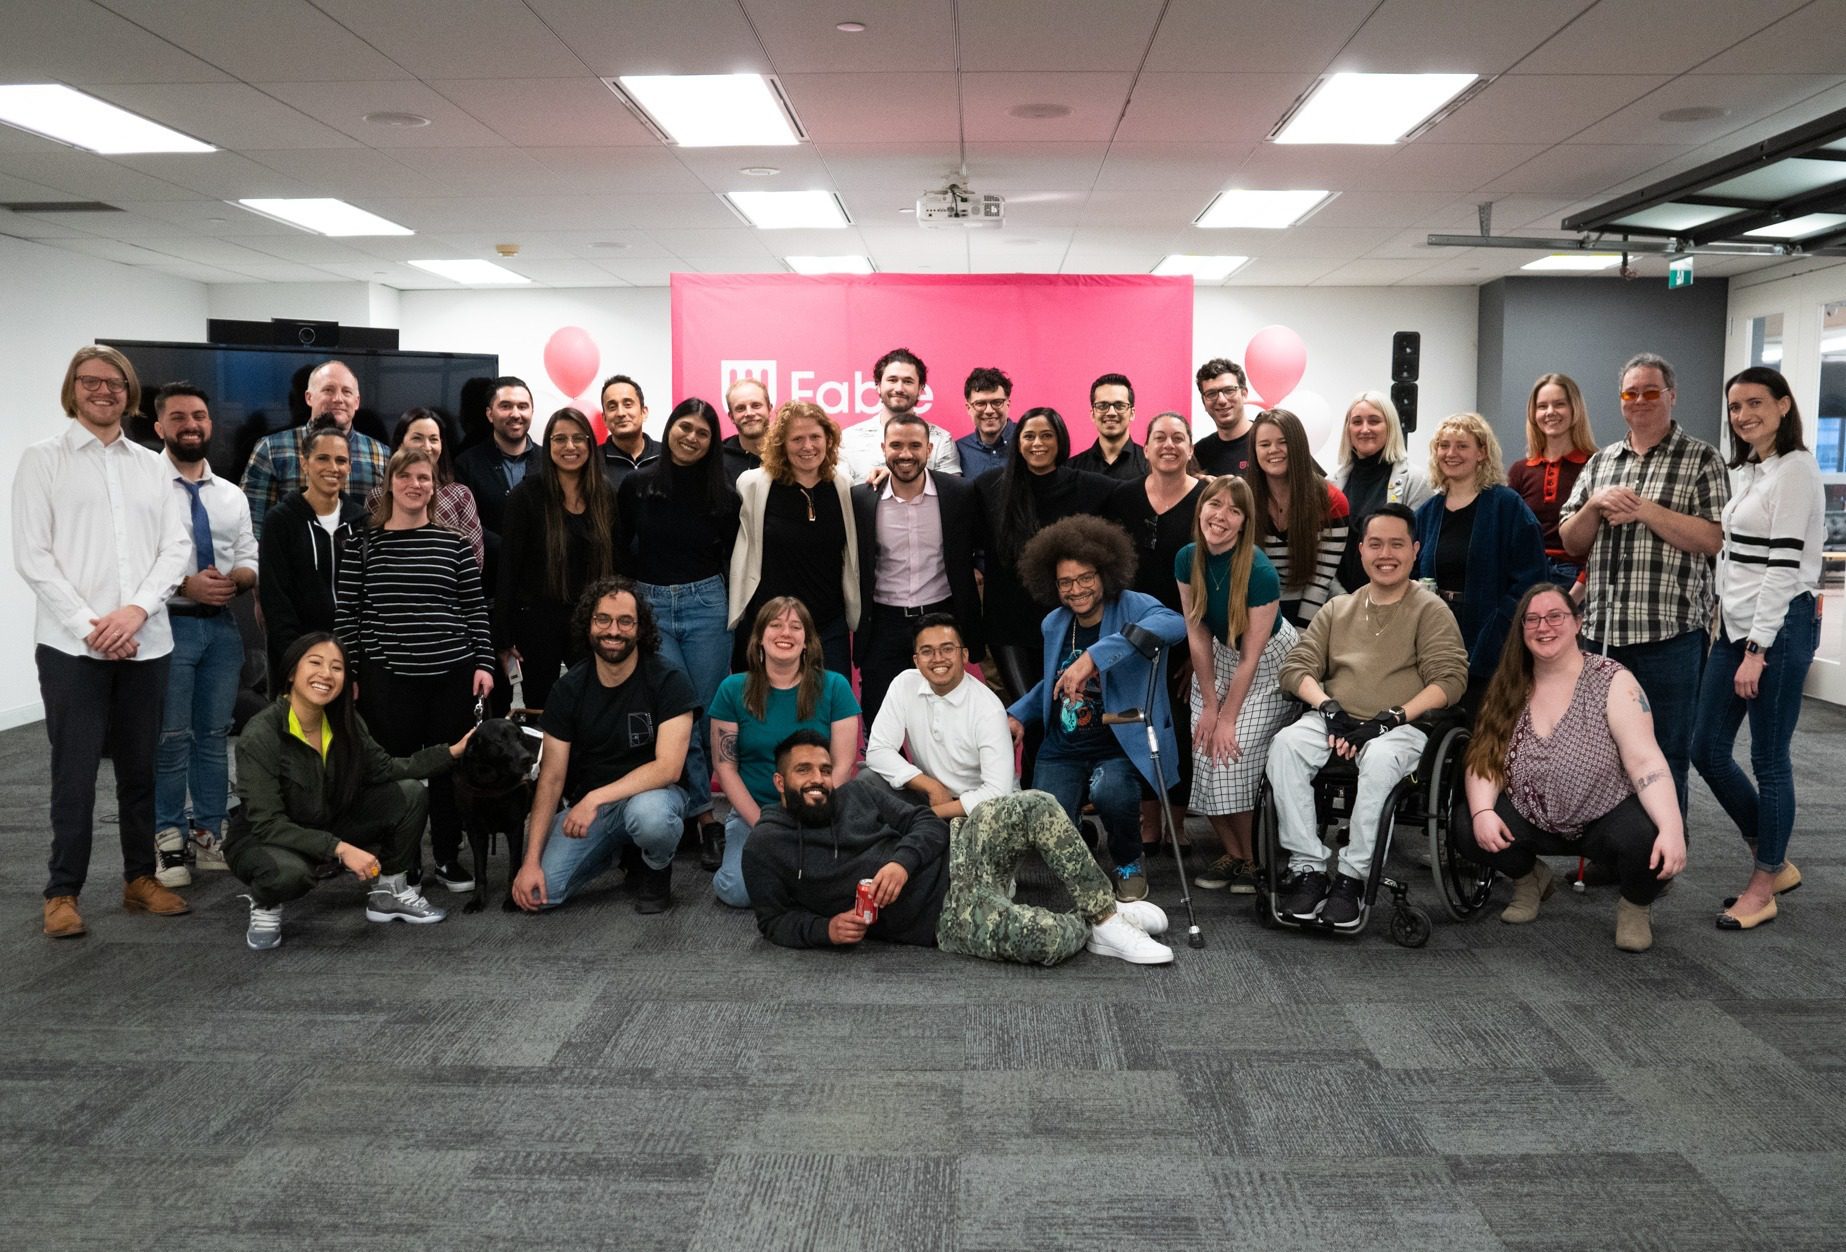 A group of 35 Fable employees standing and sitting together with big smiles. Some people sit and kneel in the front row, including a black guide dog. A pink Fable backdrop and pink and white balloons are in the background.